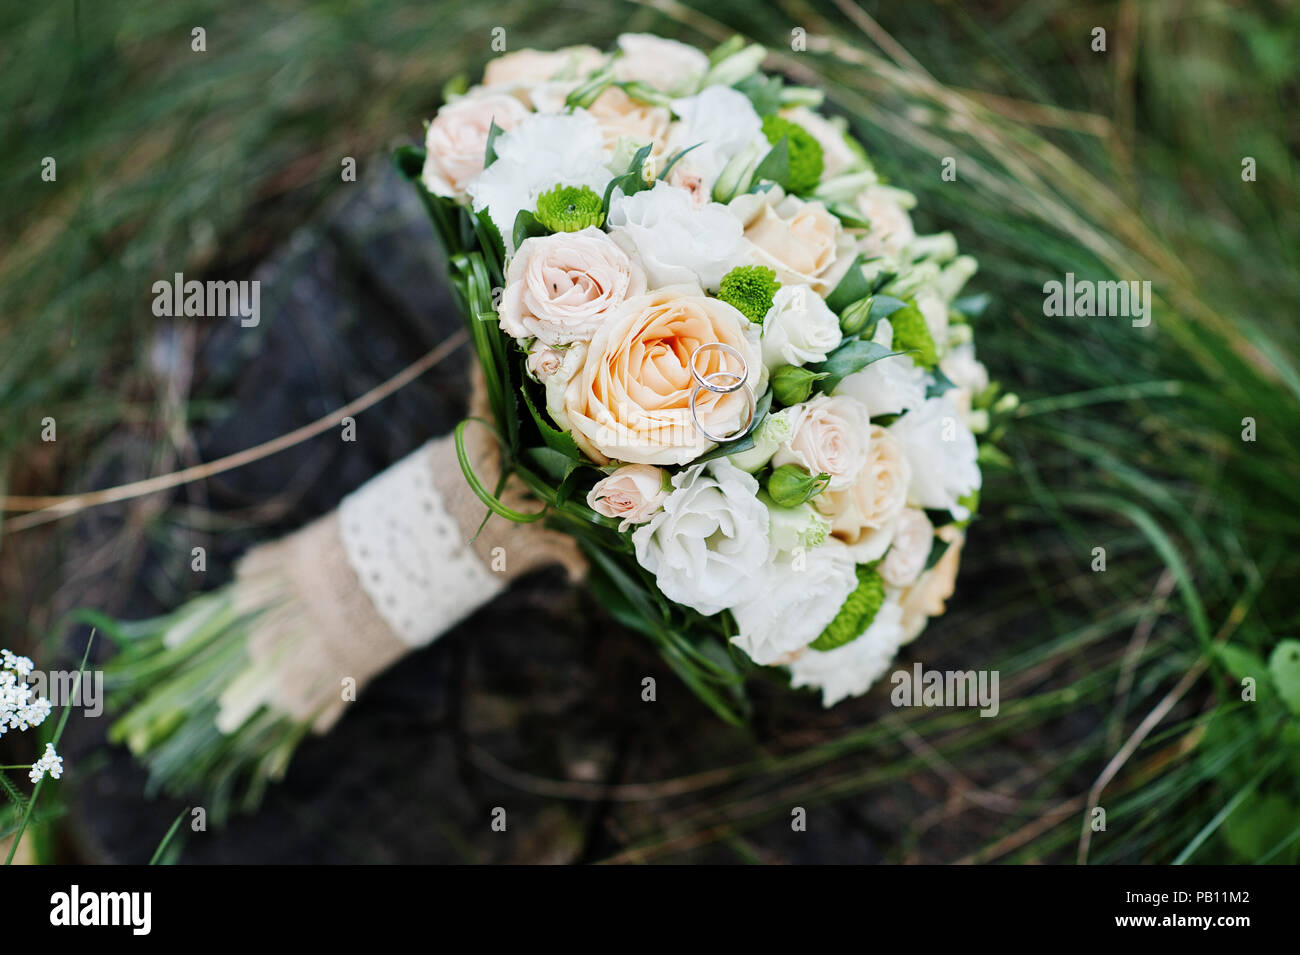 Close-up photo of wedding bouquet made of roses on the stump. Stock Photo